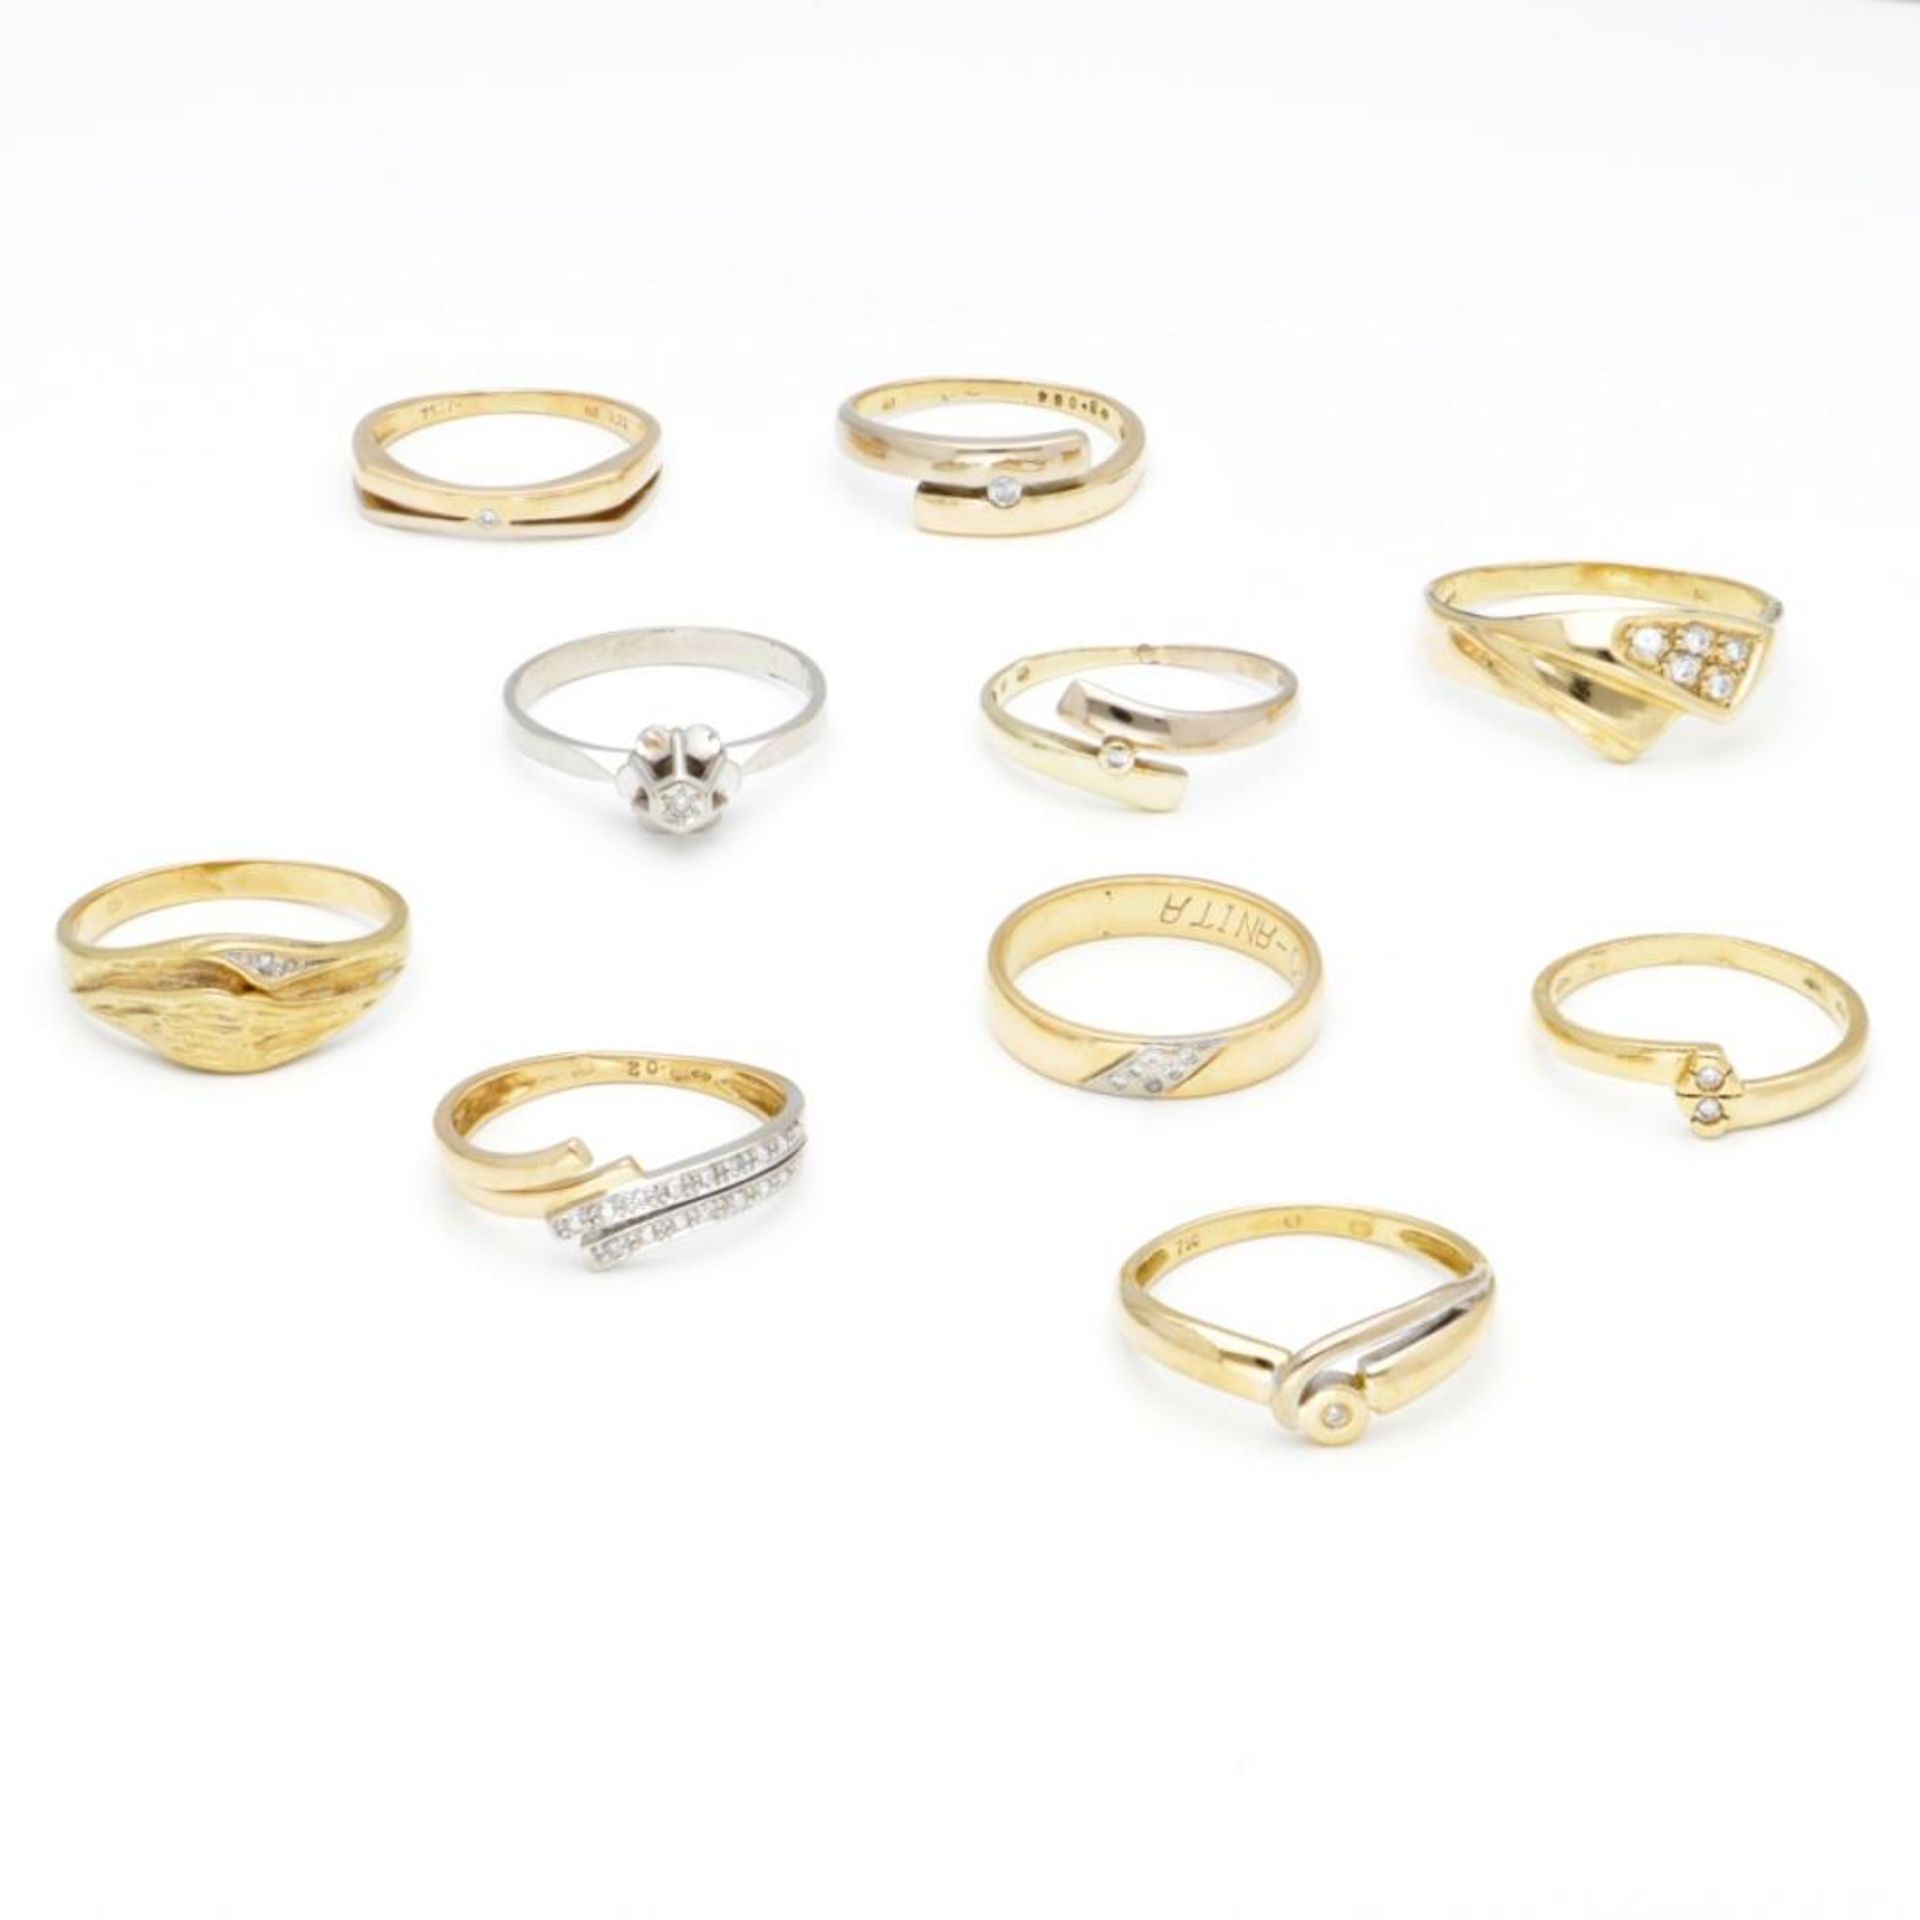 Lot of 14K. and 18K. gold rings, some of which are set with diamonds.